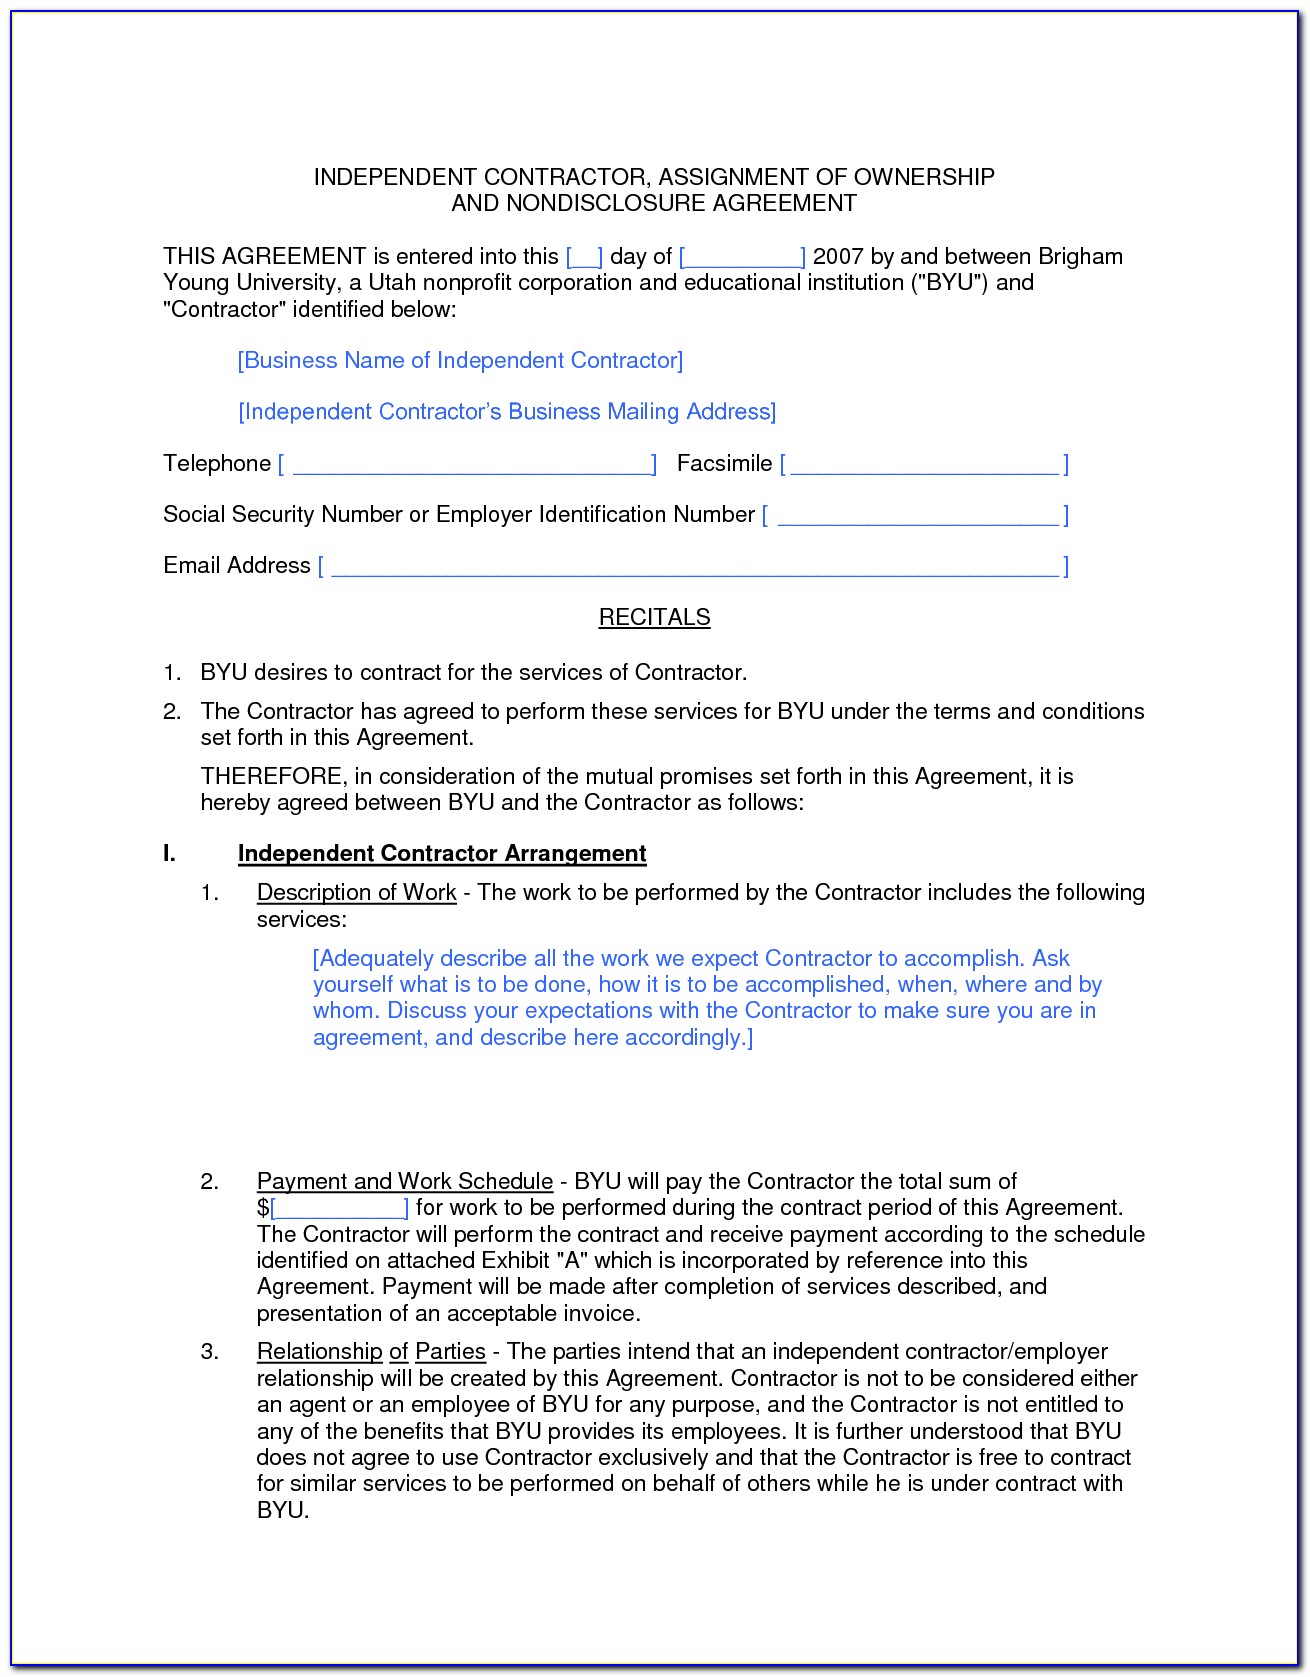 Form 1099 Contractor Income